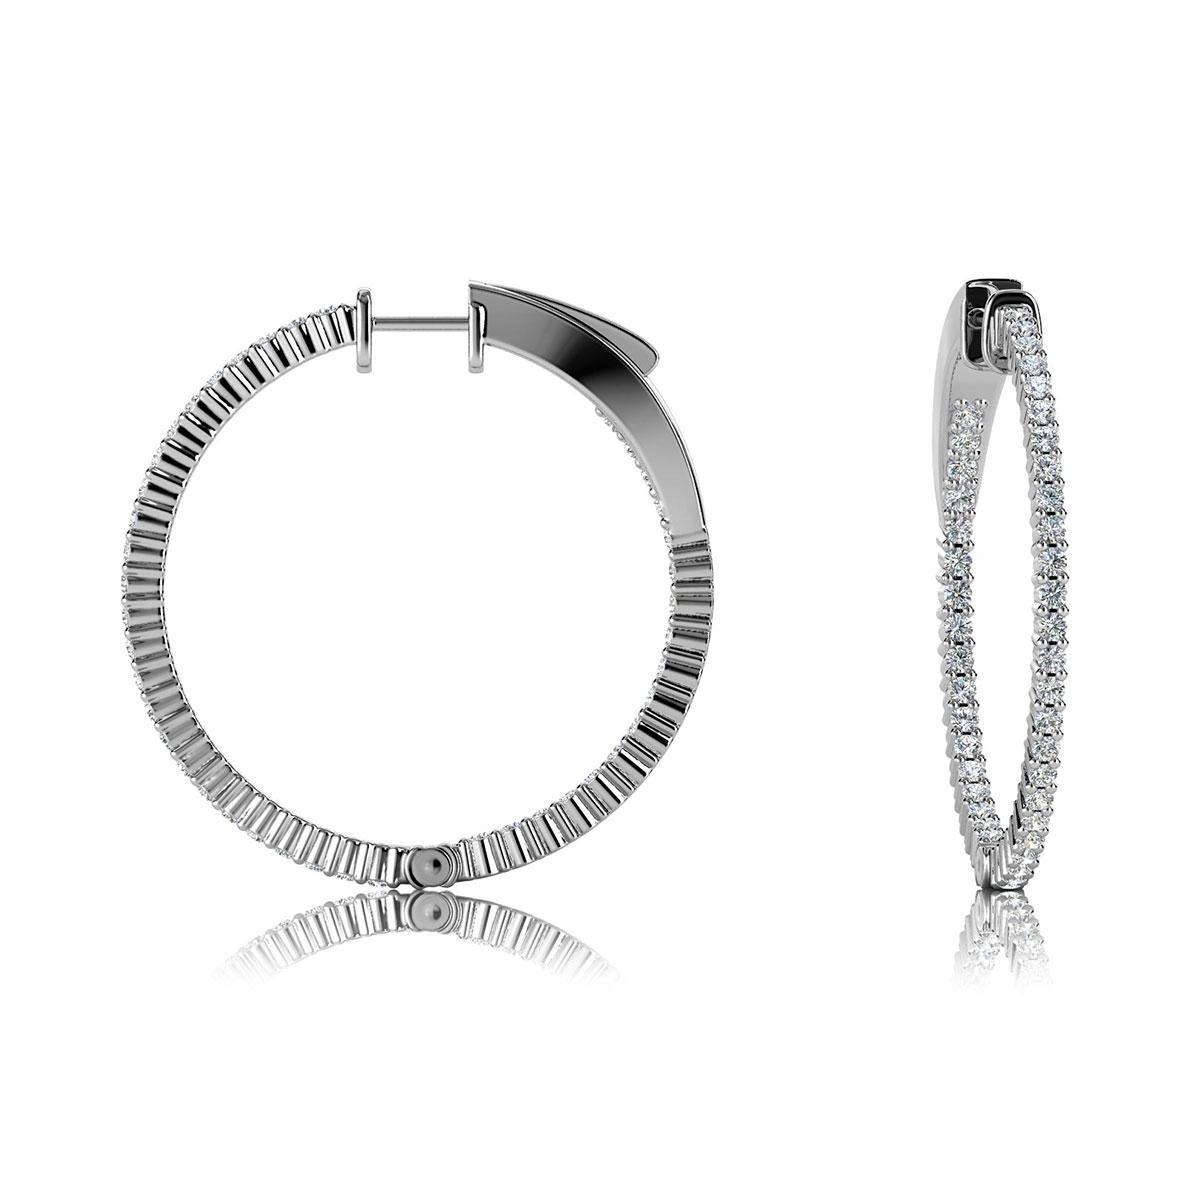 This hoop earring features round brilliant diamonds micro-prong set. The diamonds are set throughout the earrings outside and on the inner side. It's 1.2 inch in diameter. Experience the difference!

Product details: 

Center Gemstone Color: